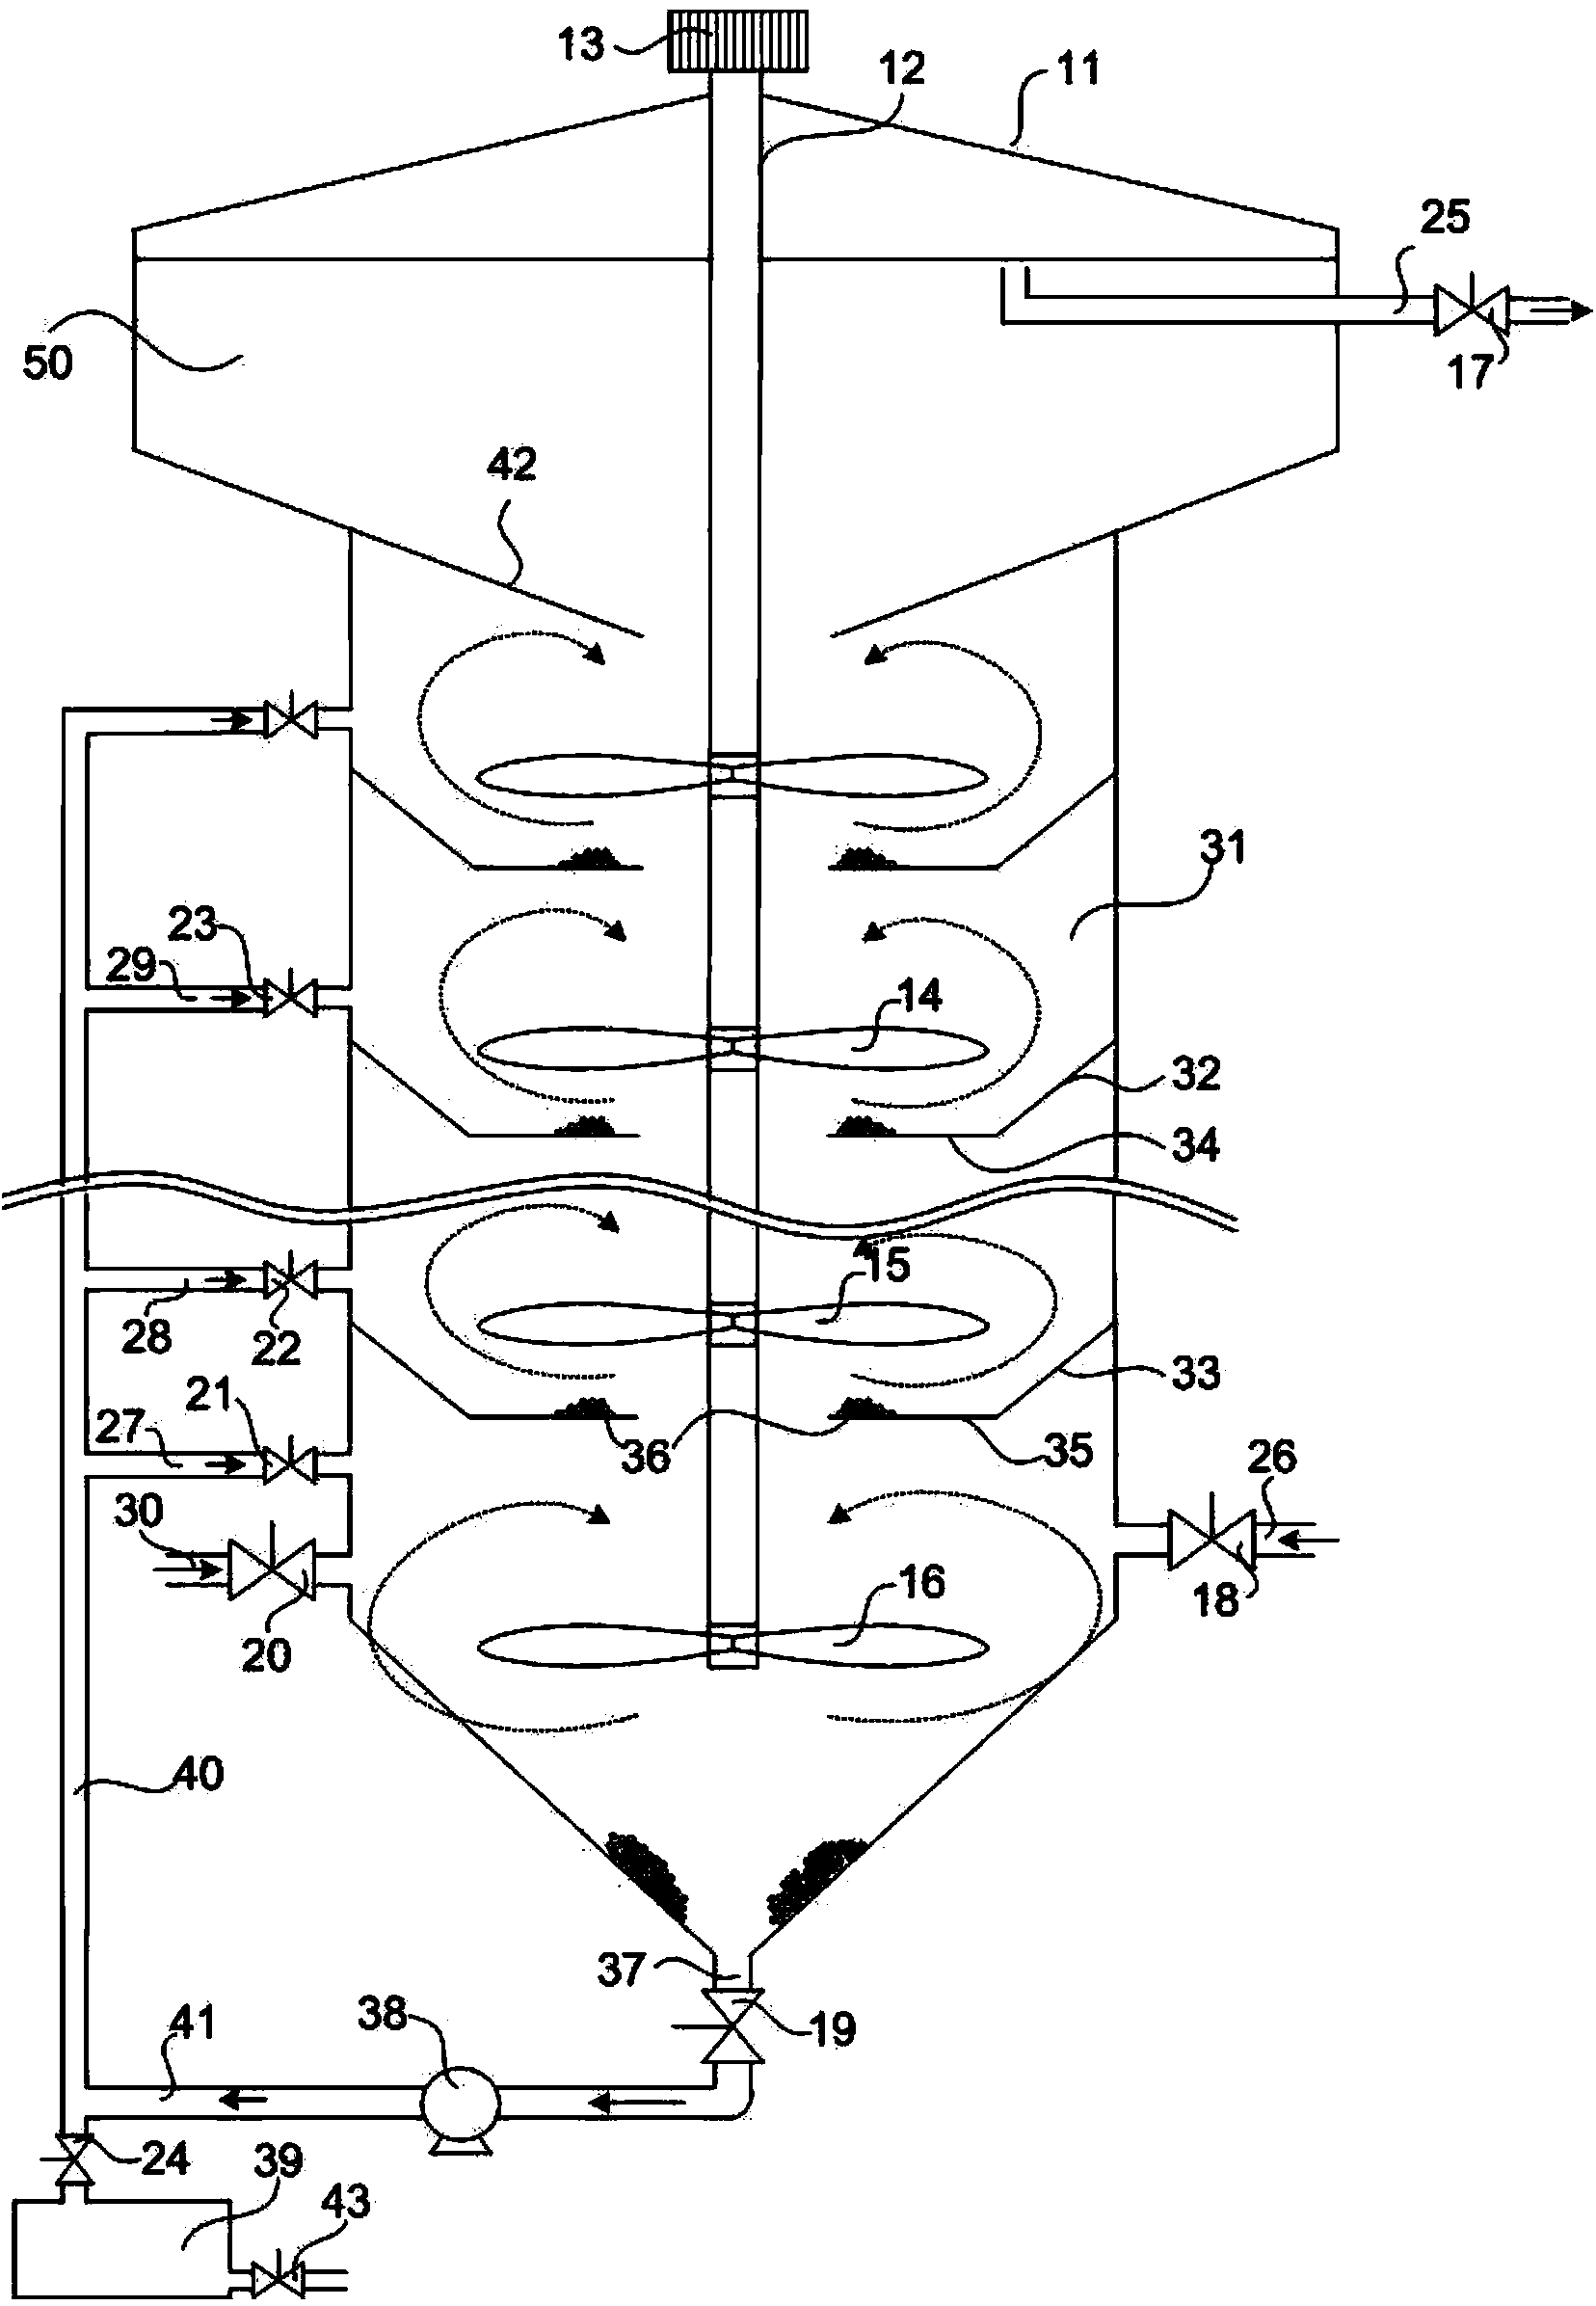 Crystallization reaction apparatus for recovering resources